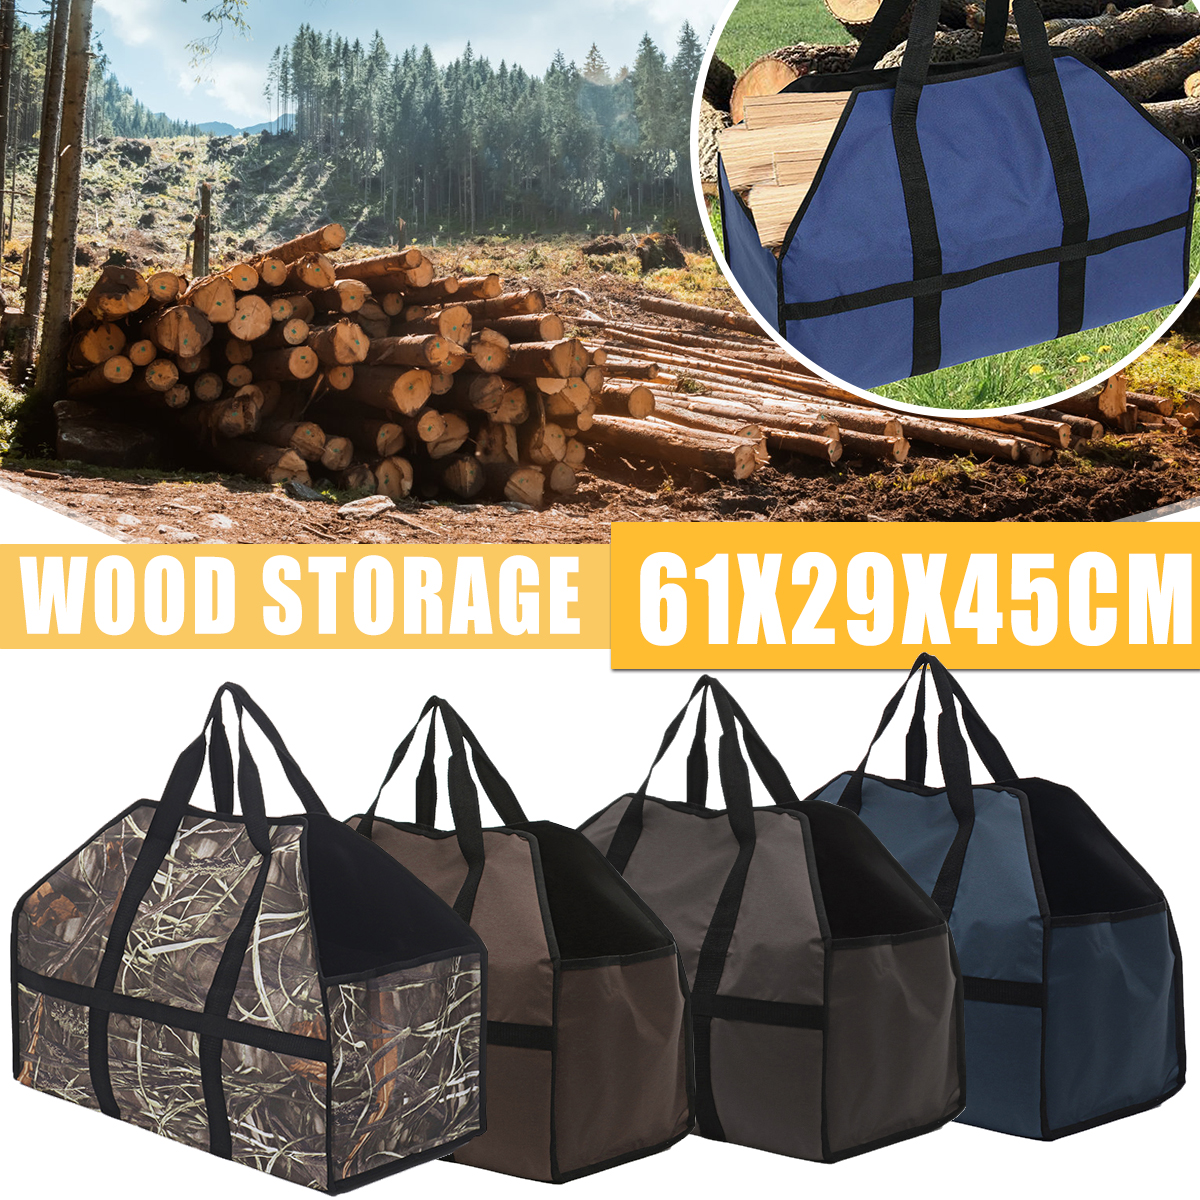 210D-Oxford-Cloth-Firewood-Carrier-Bag-Wood-Holder-Storage-Bag-Tote-Organizer-Outdoor-Camping-Picnic-1764243-1